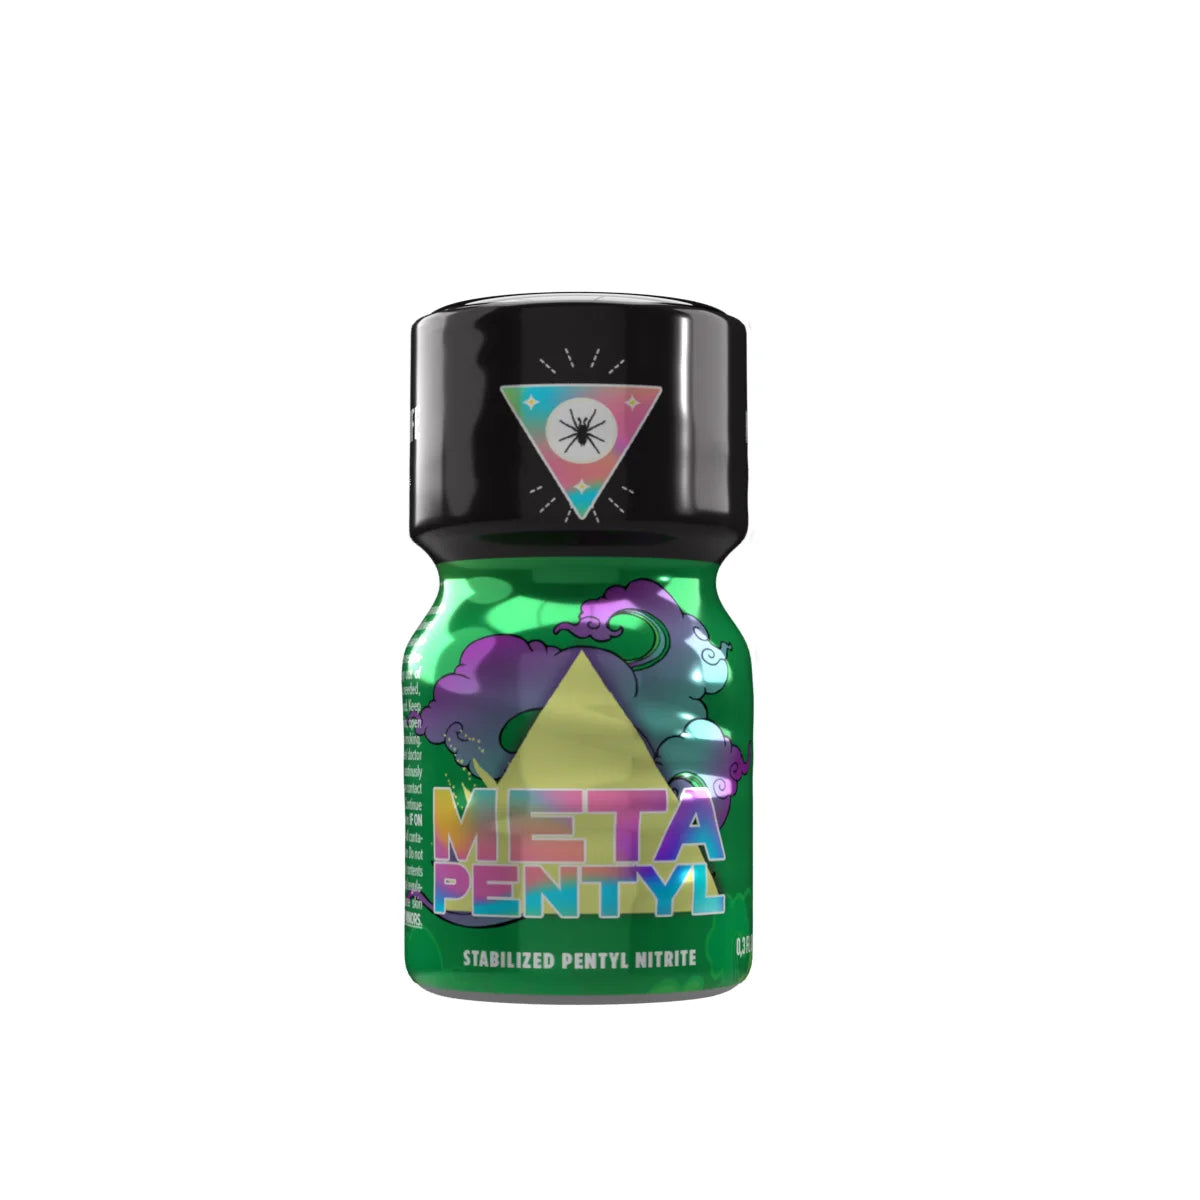 A product photo of a 10ml bottle of Meta Pentyl Poppers.